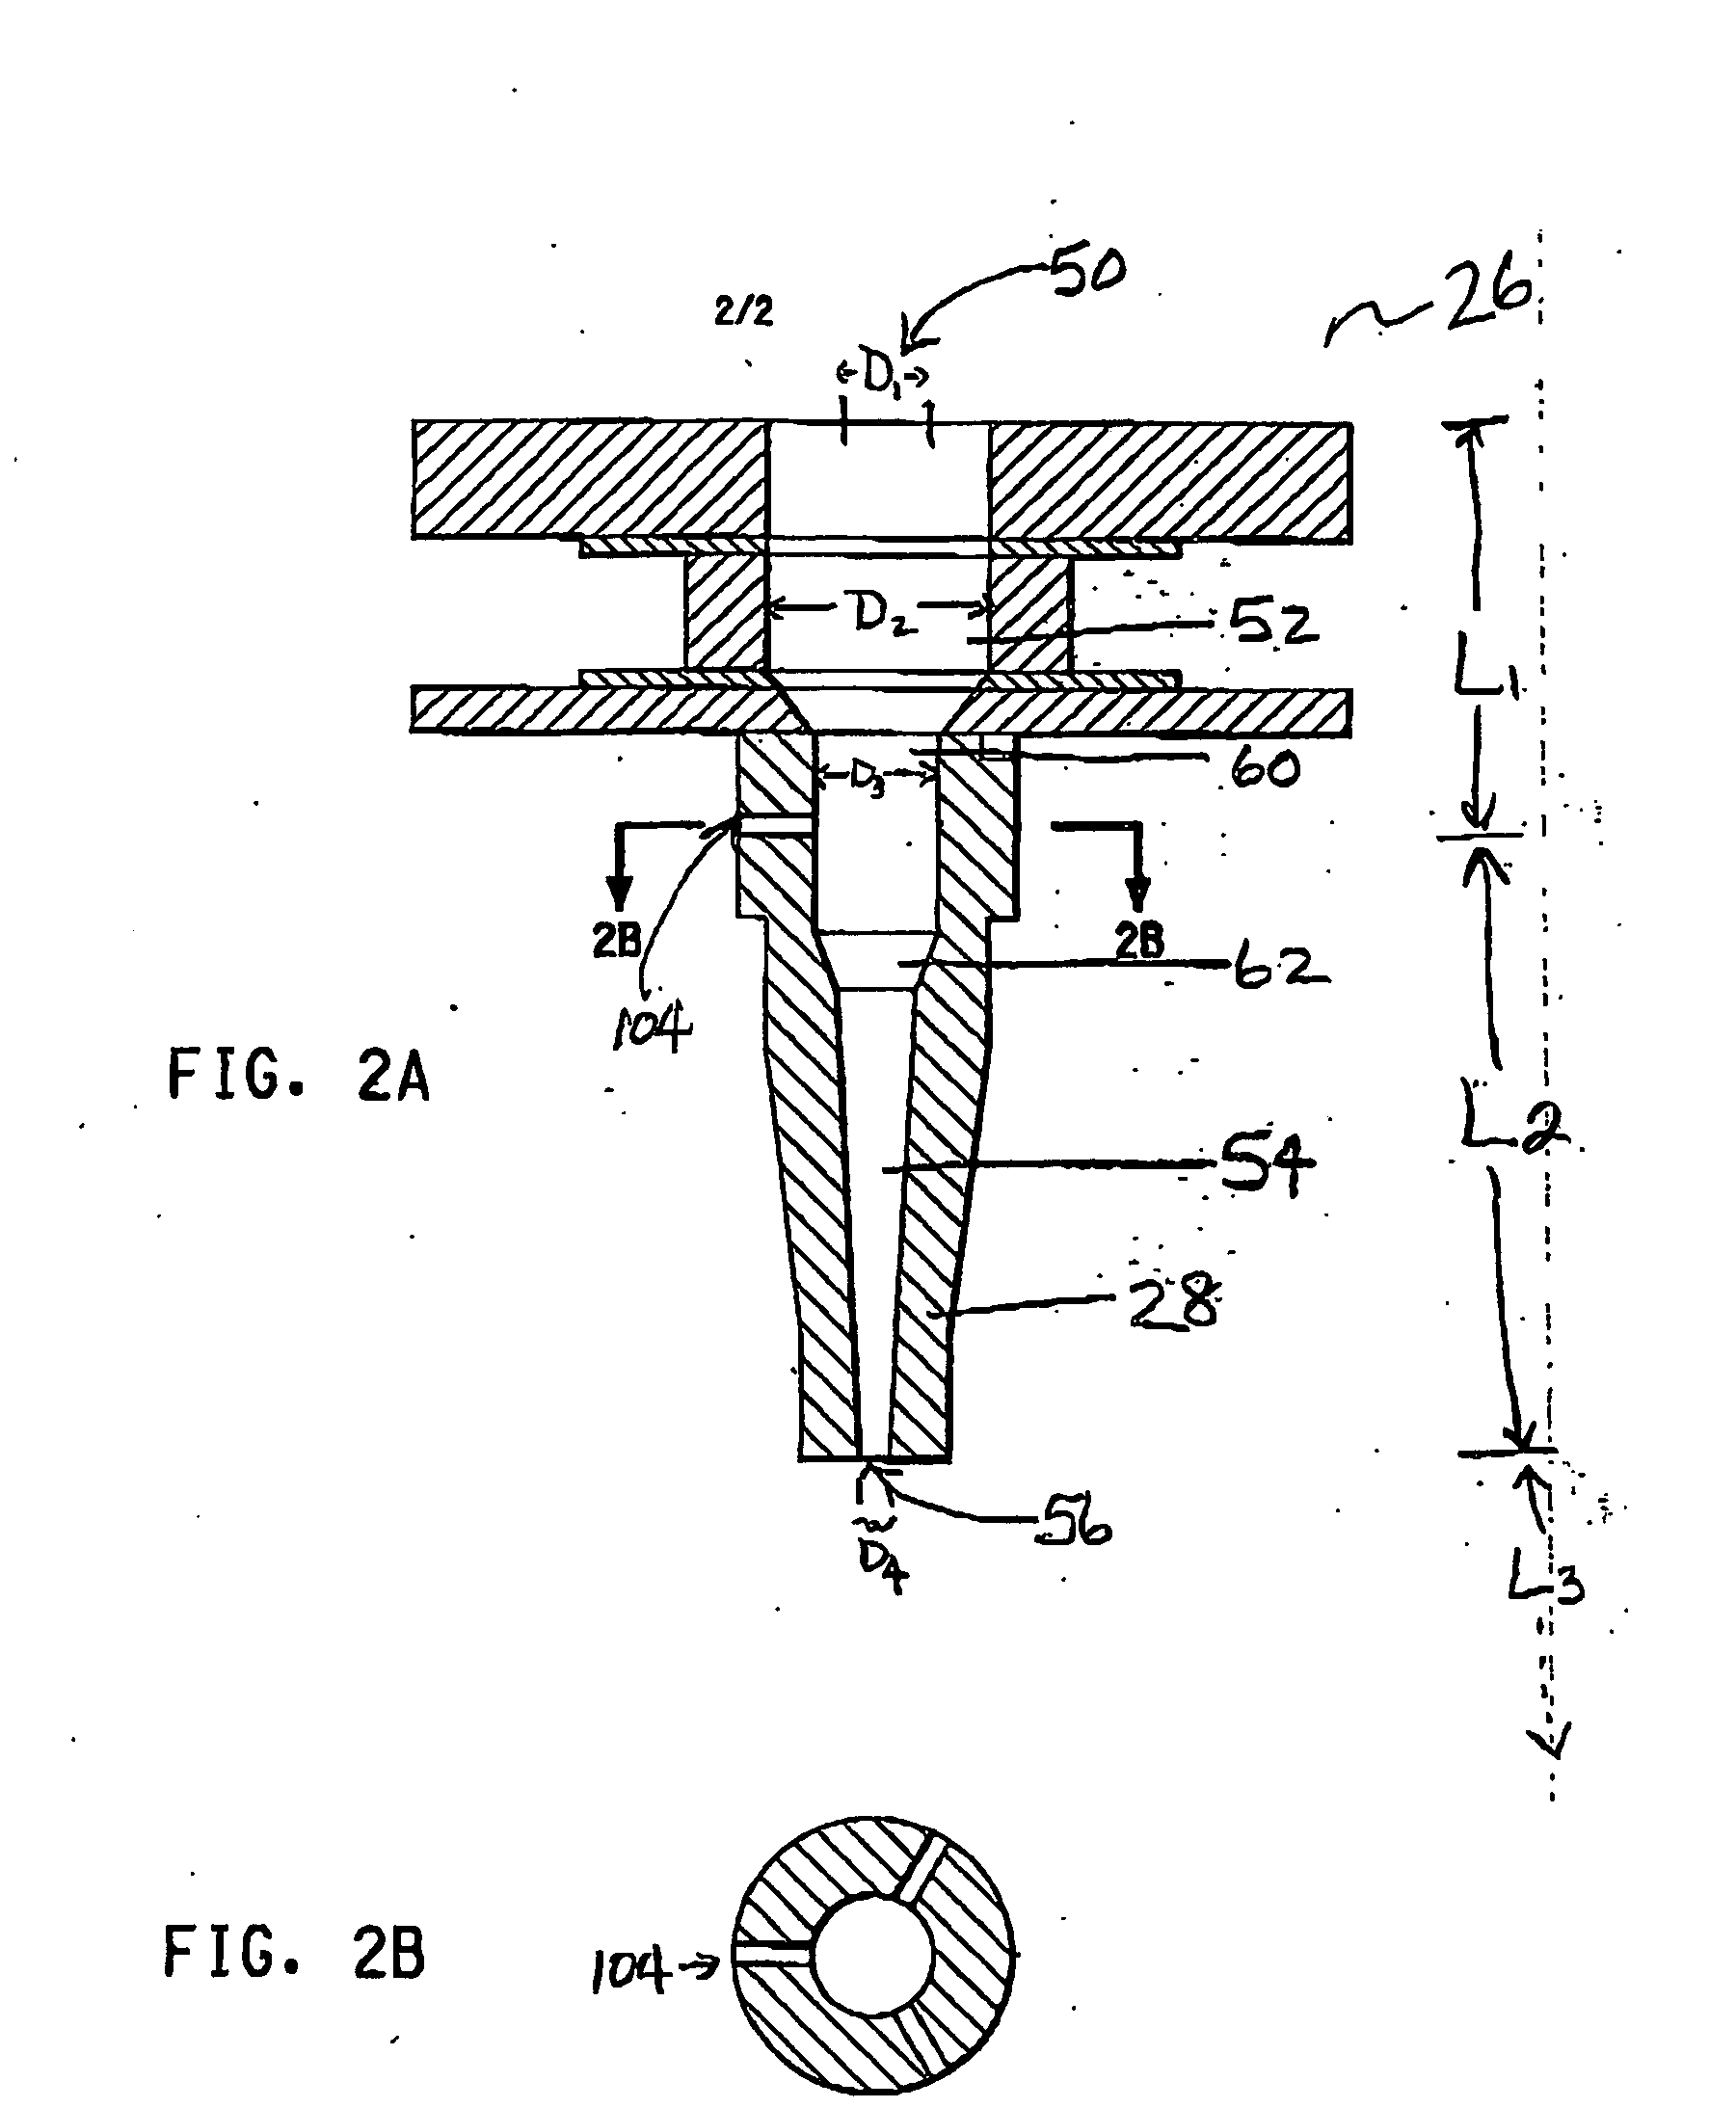 Method of producing nanoparticles using a evaporation-condensation process with a reaction chamber plasma reactor system